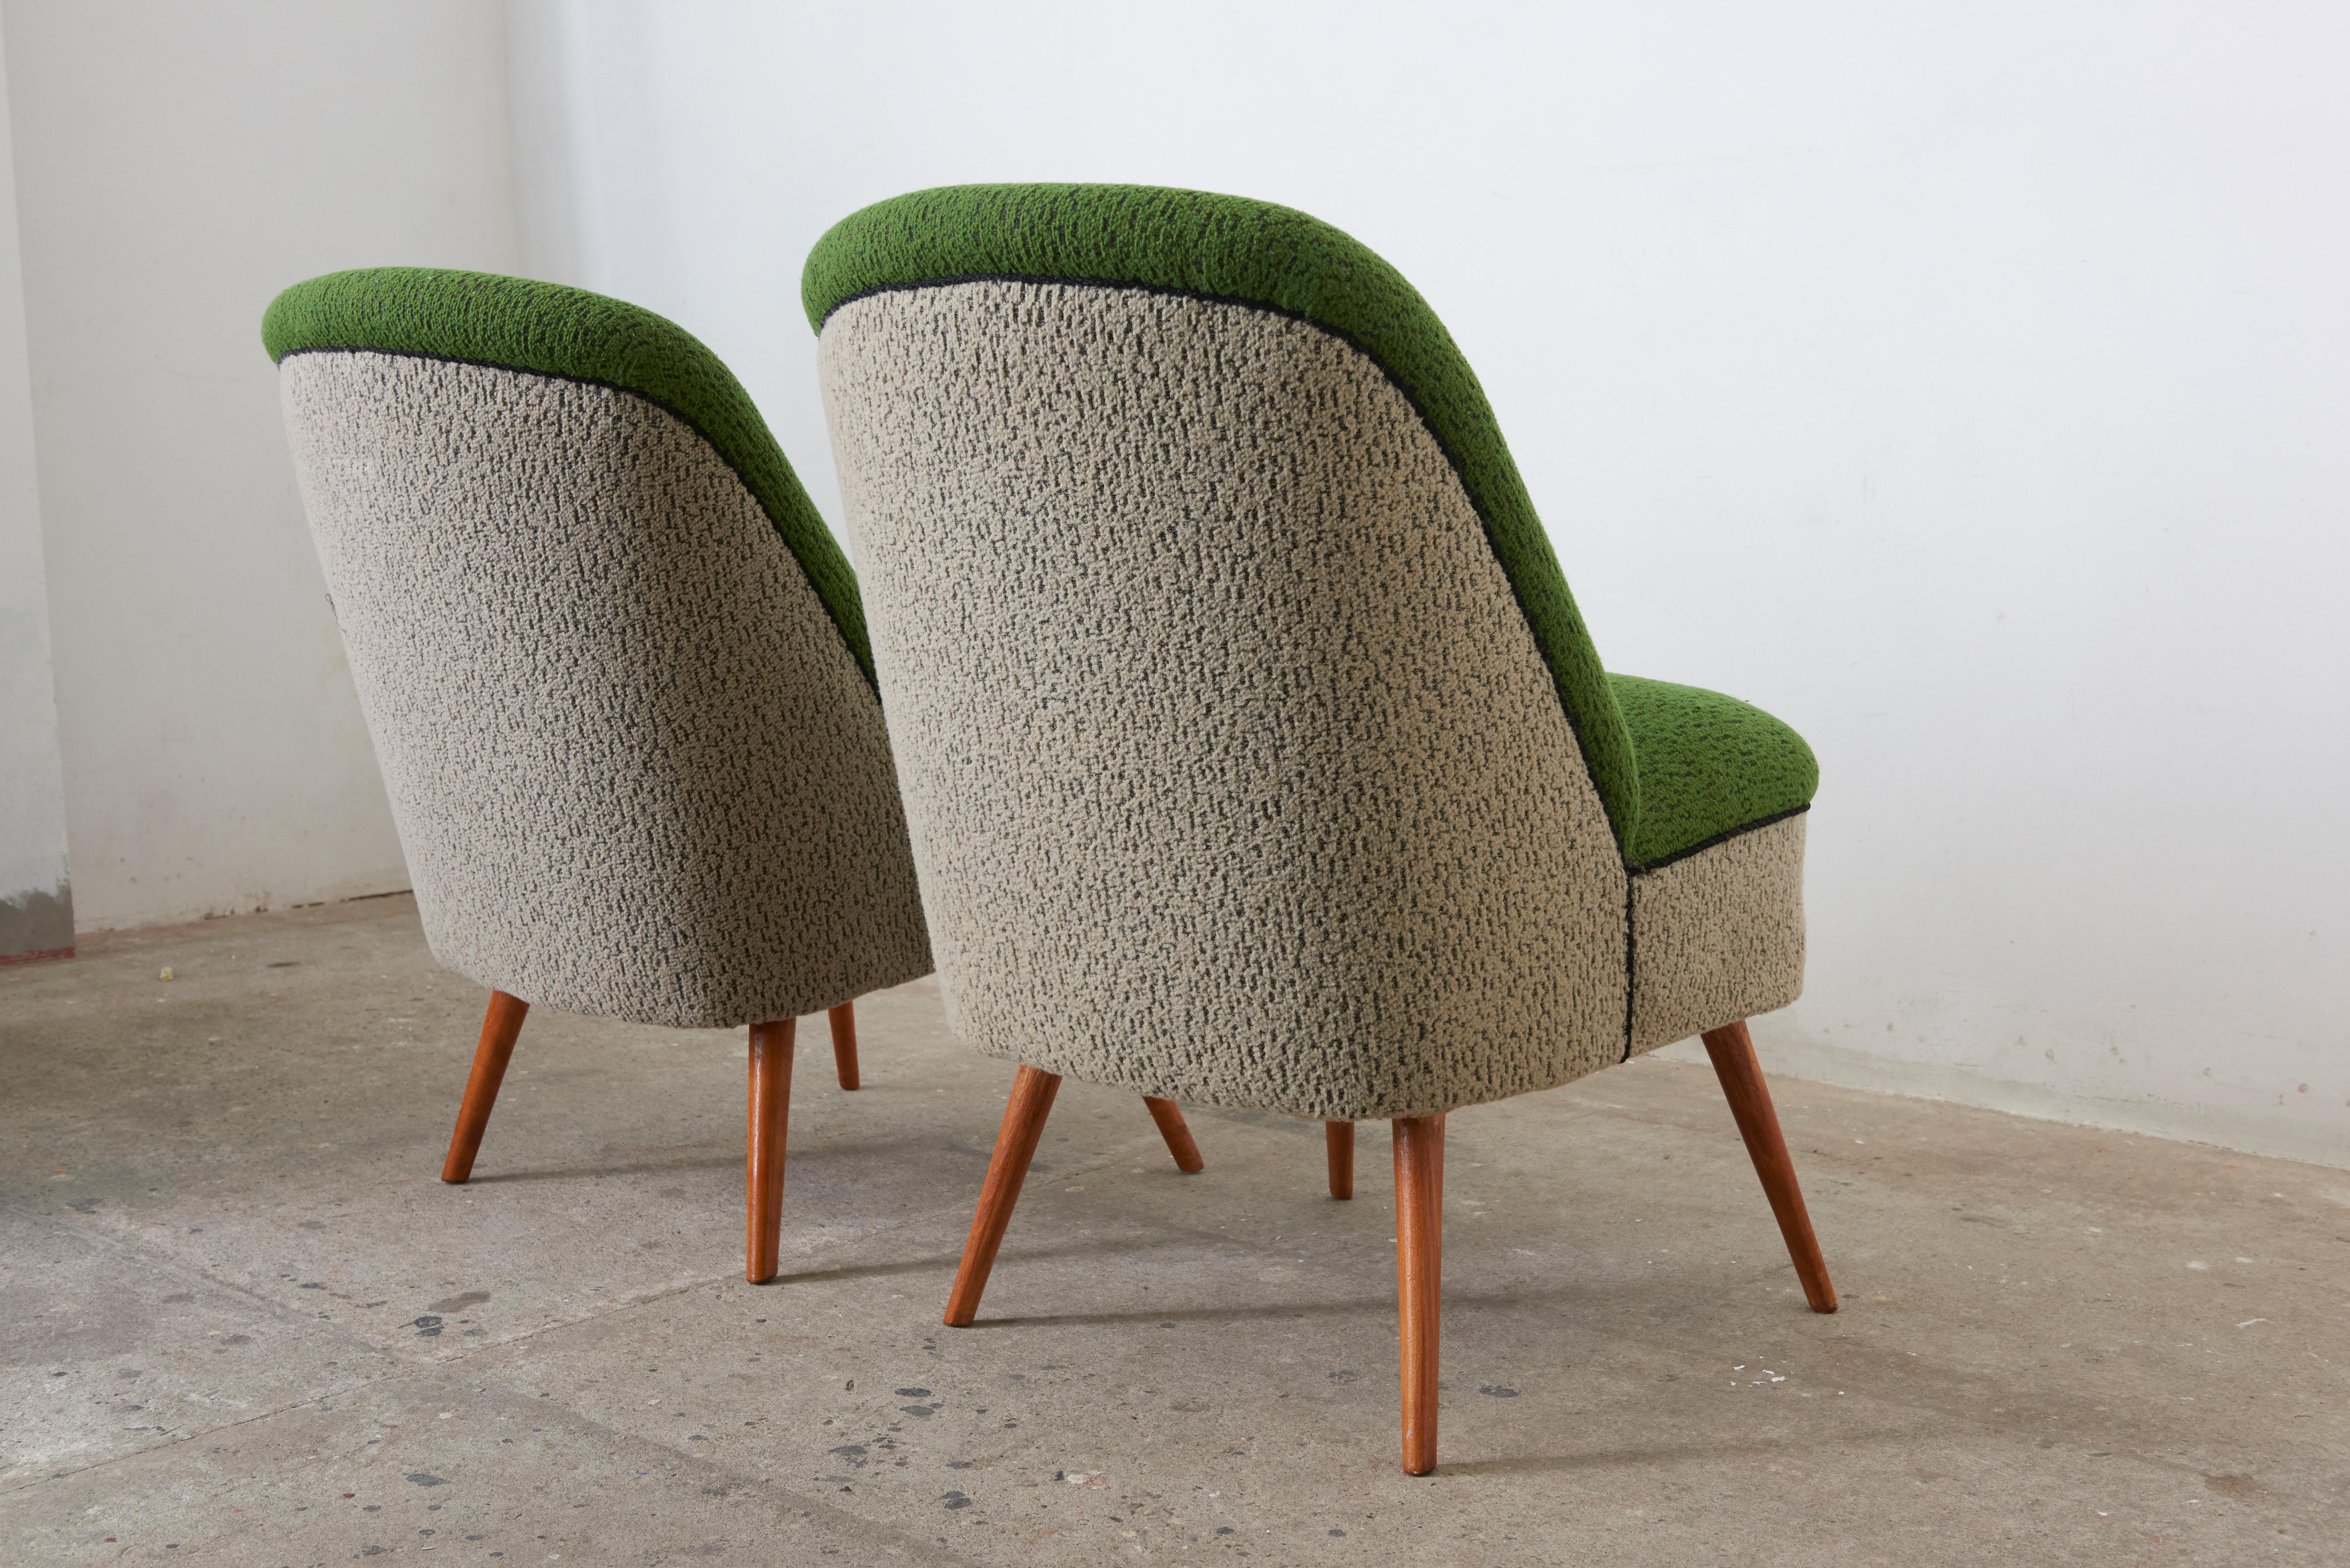 Hand-Crafted Sitting Group of Green and Gray 1950s Coctail Lounge Chairs, Switzerland